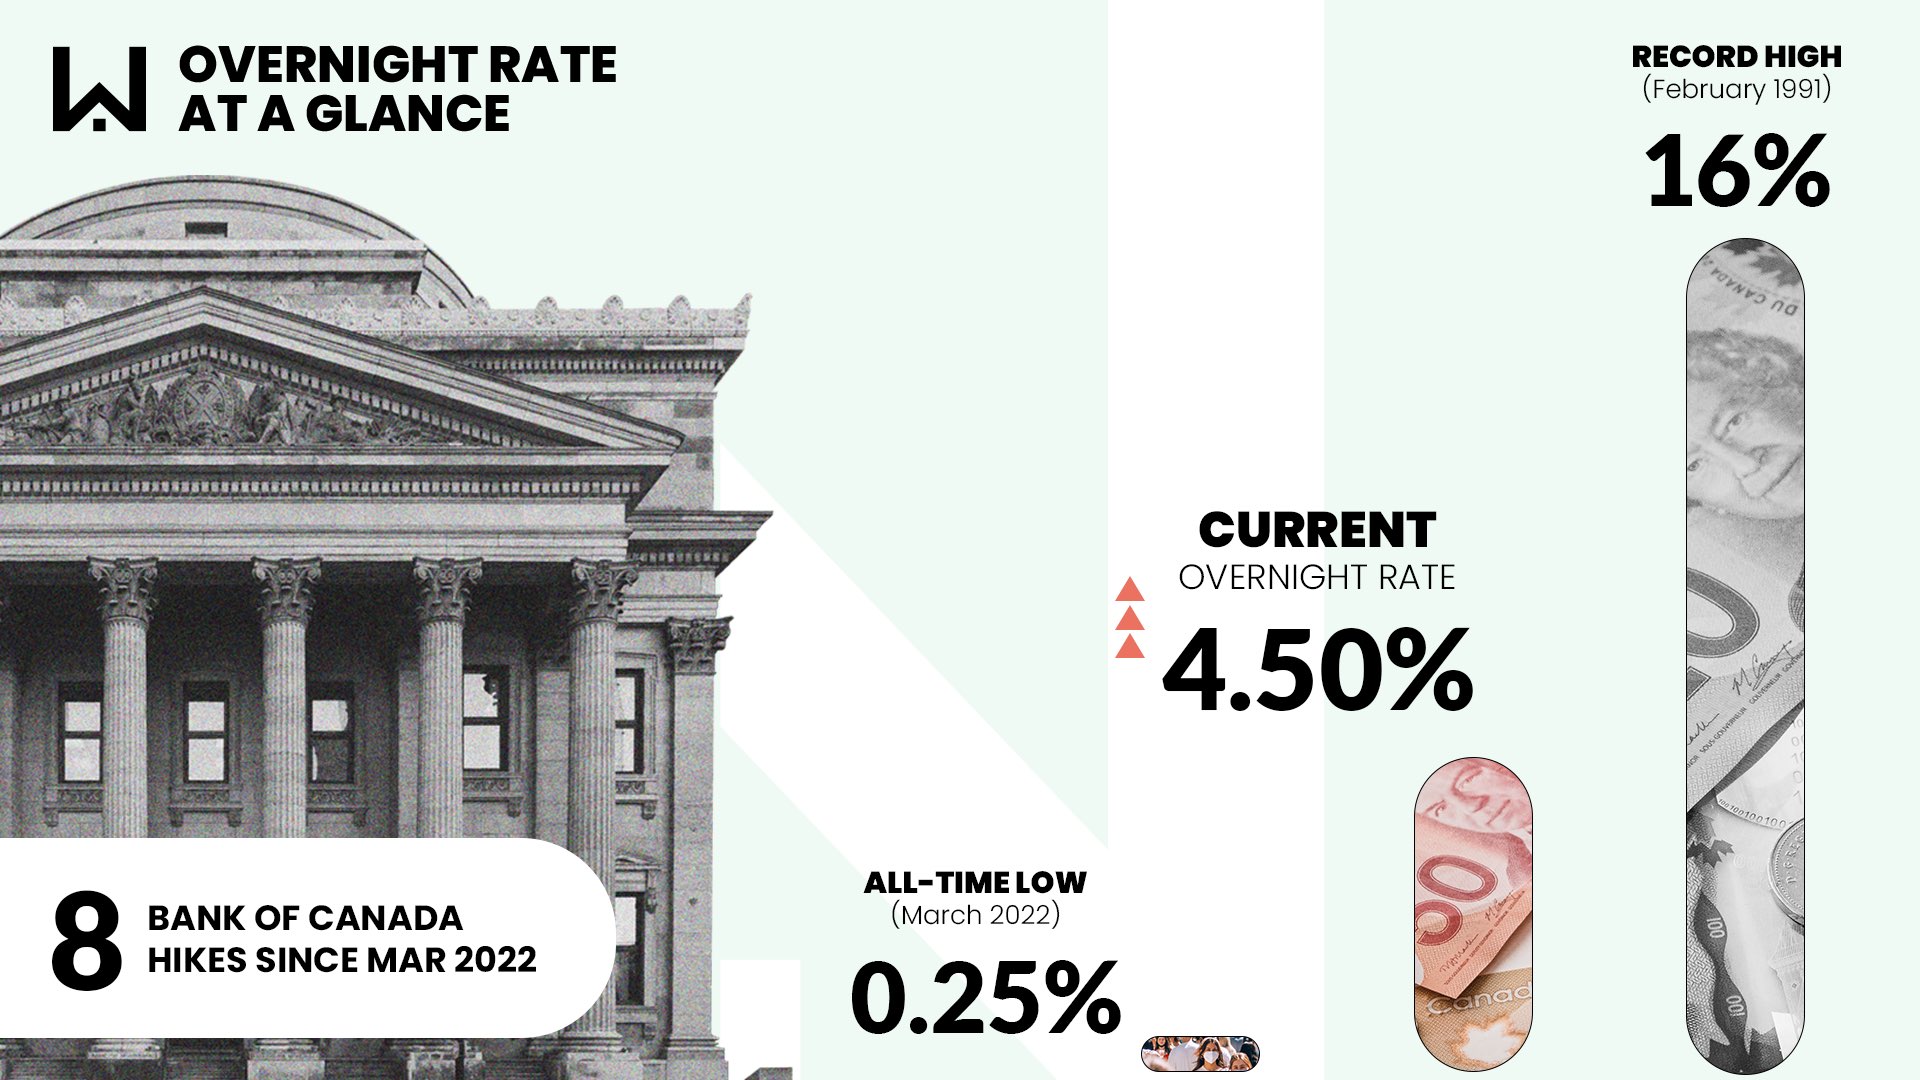 Bank of Canada overnight rate hikes